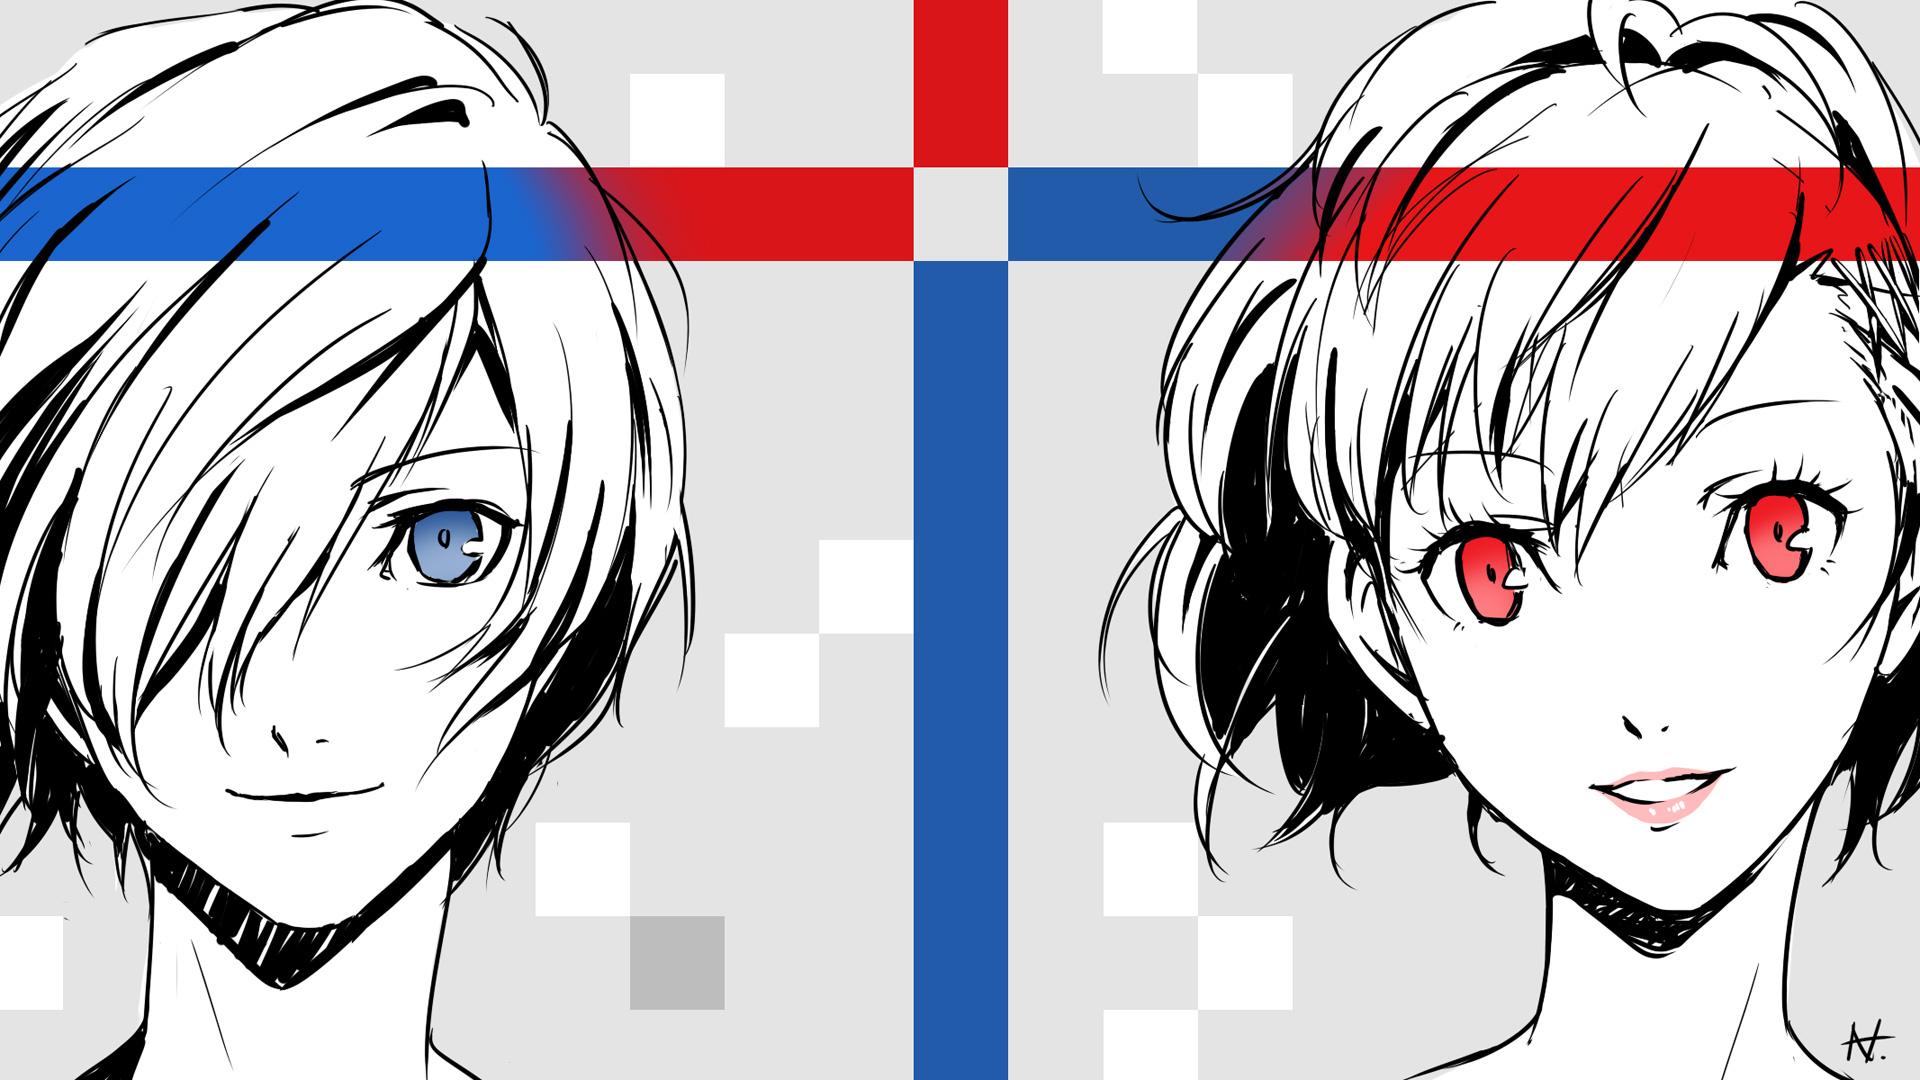 1920x1080 20+ Persona 3 Portable HD Wallpapers and Backgrounds